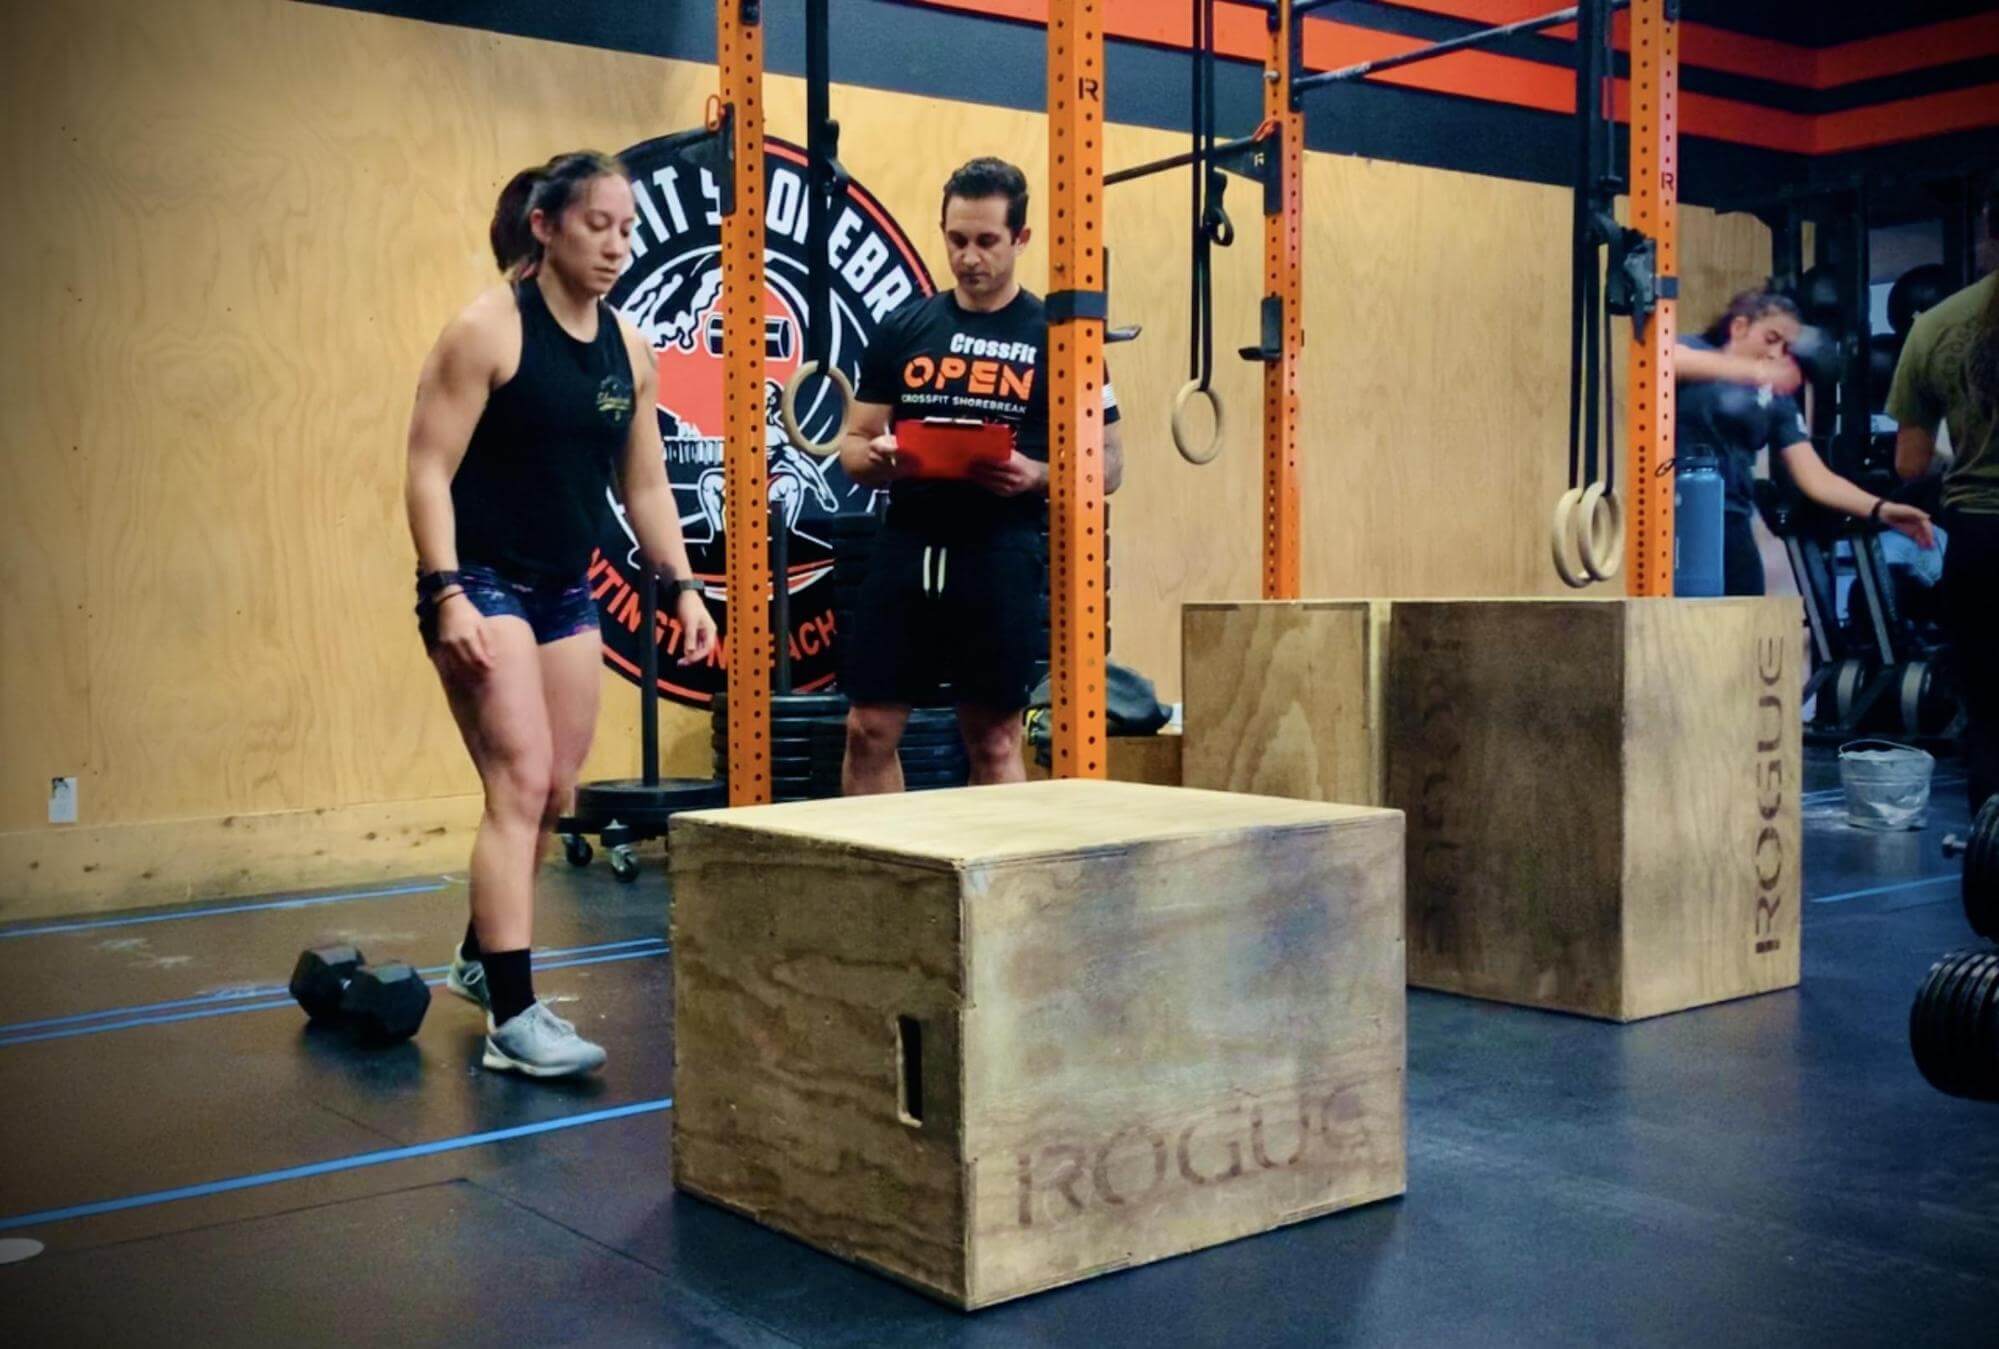 Dr. Jessica Crowder stepping up to a box jump while a CrossFit trainer looks on during a workout in Orange County, CA.